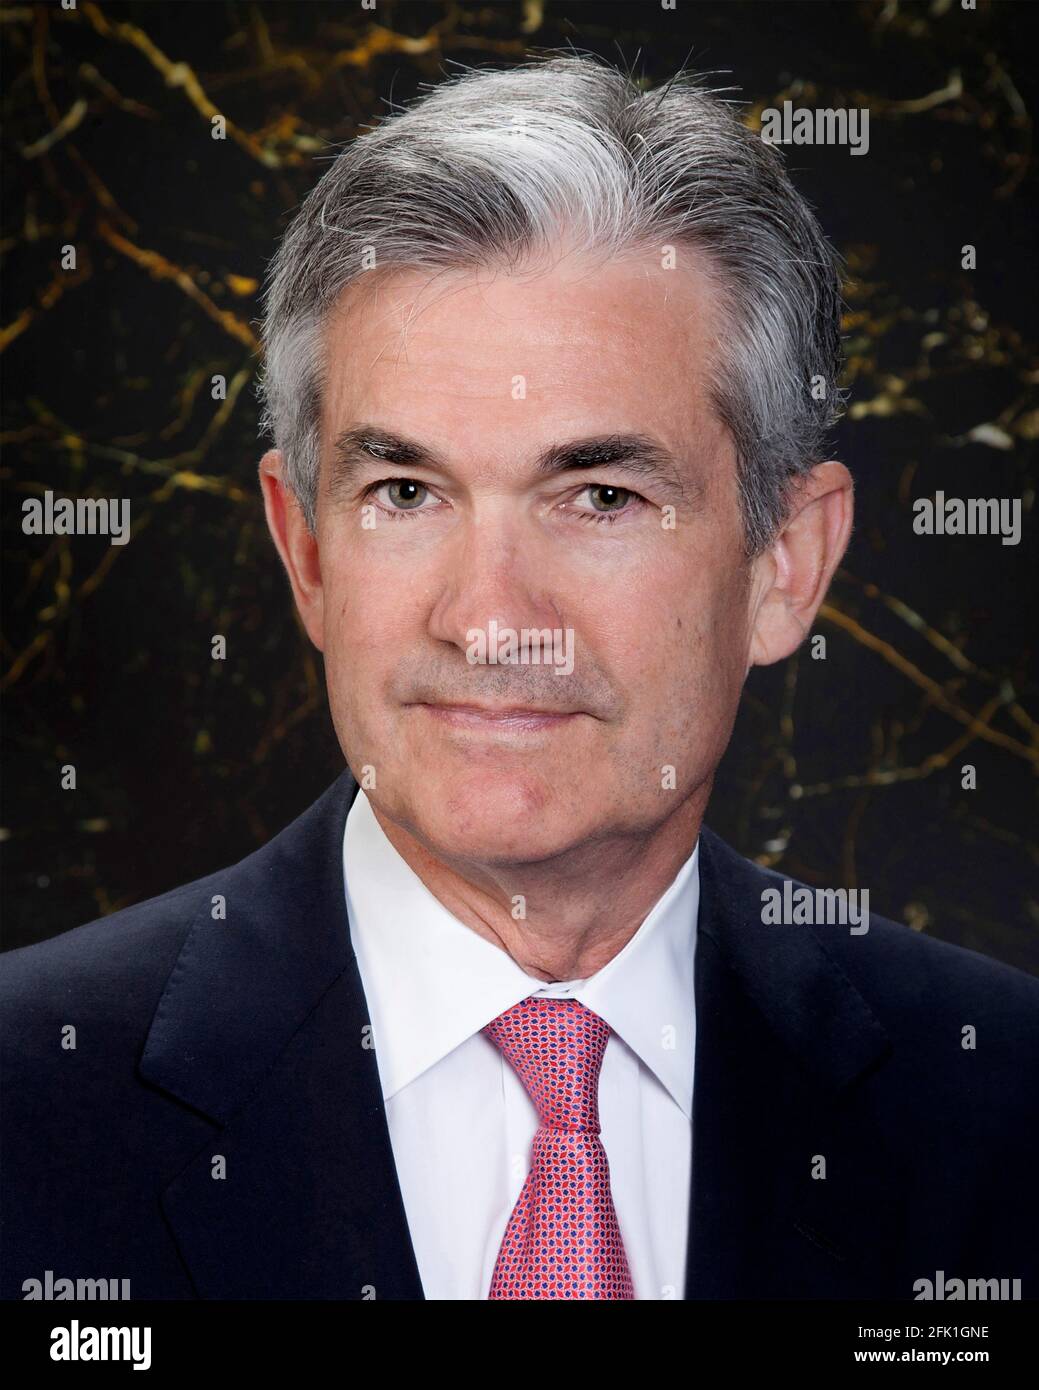 Jerome Powell. Portrait of the 16th Chairman of the Federal Reserve, Jerome Hayden 'Jay' Powell (b. 1953), official photo Stock Photo